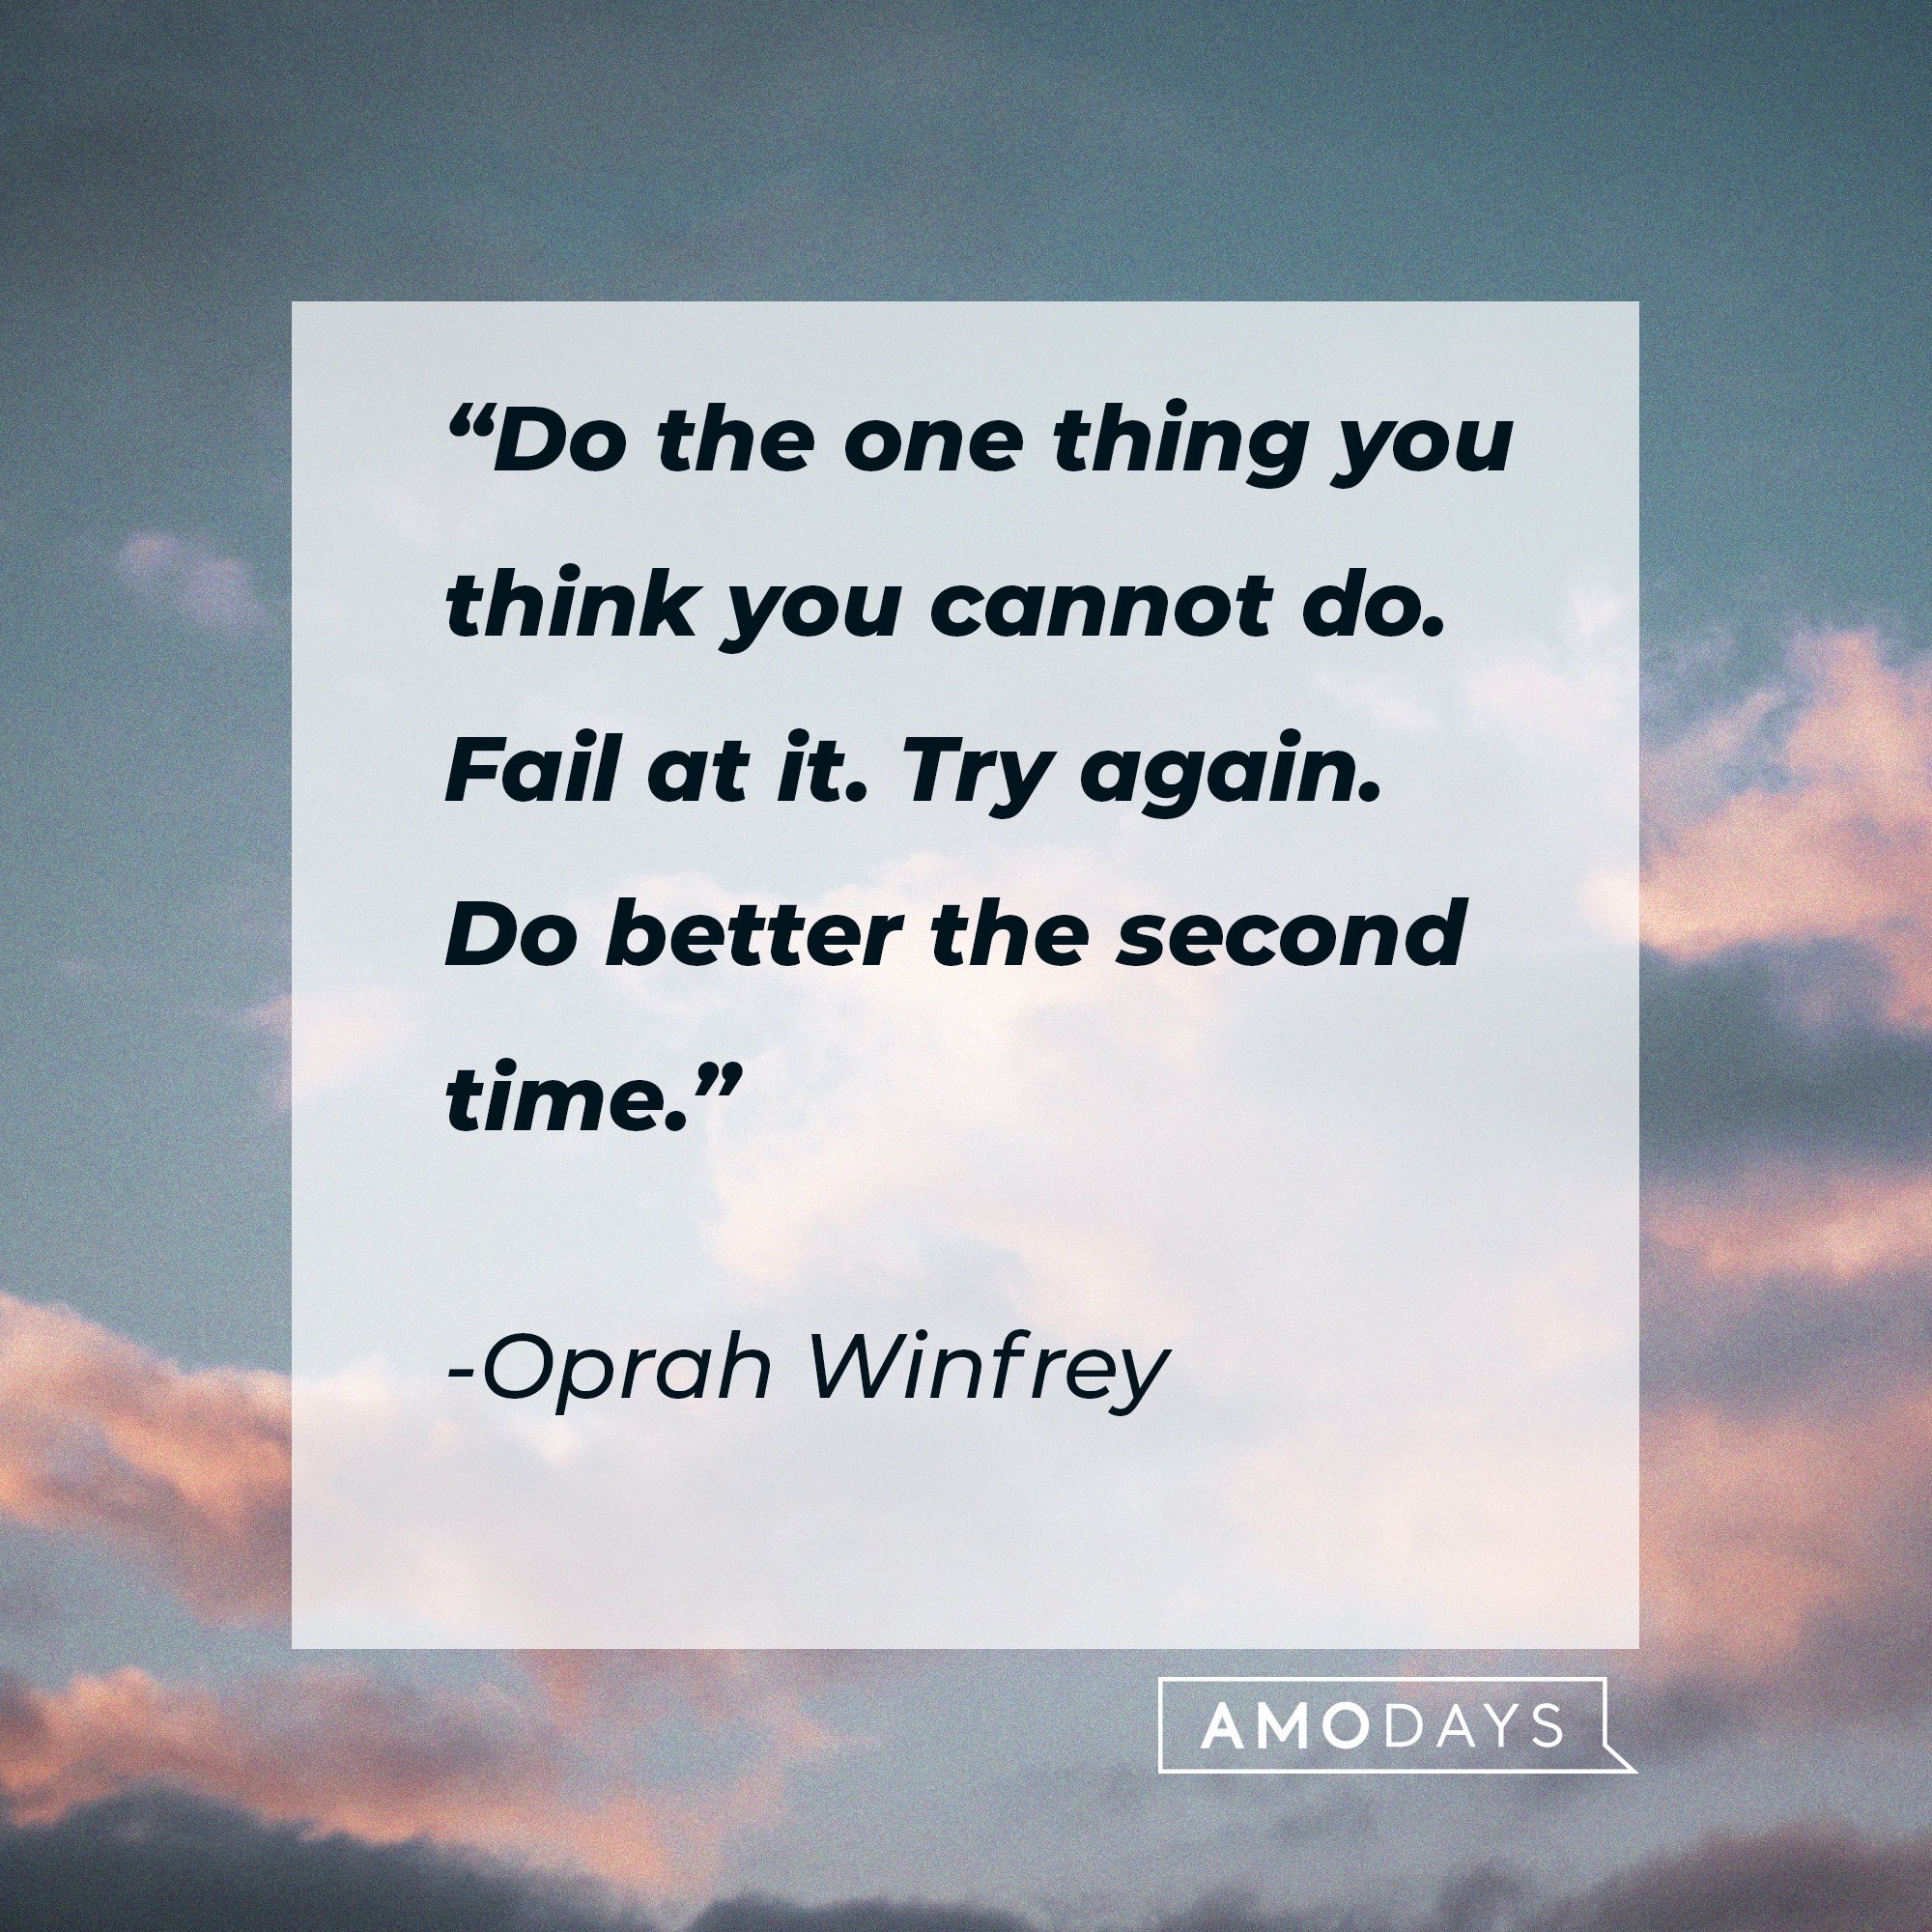 Oprah Winfrey's quote: “Do the one thing you think you cannot do. Fail at it. Try again. Do better the second time.” | Image: AmoDays